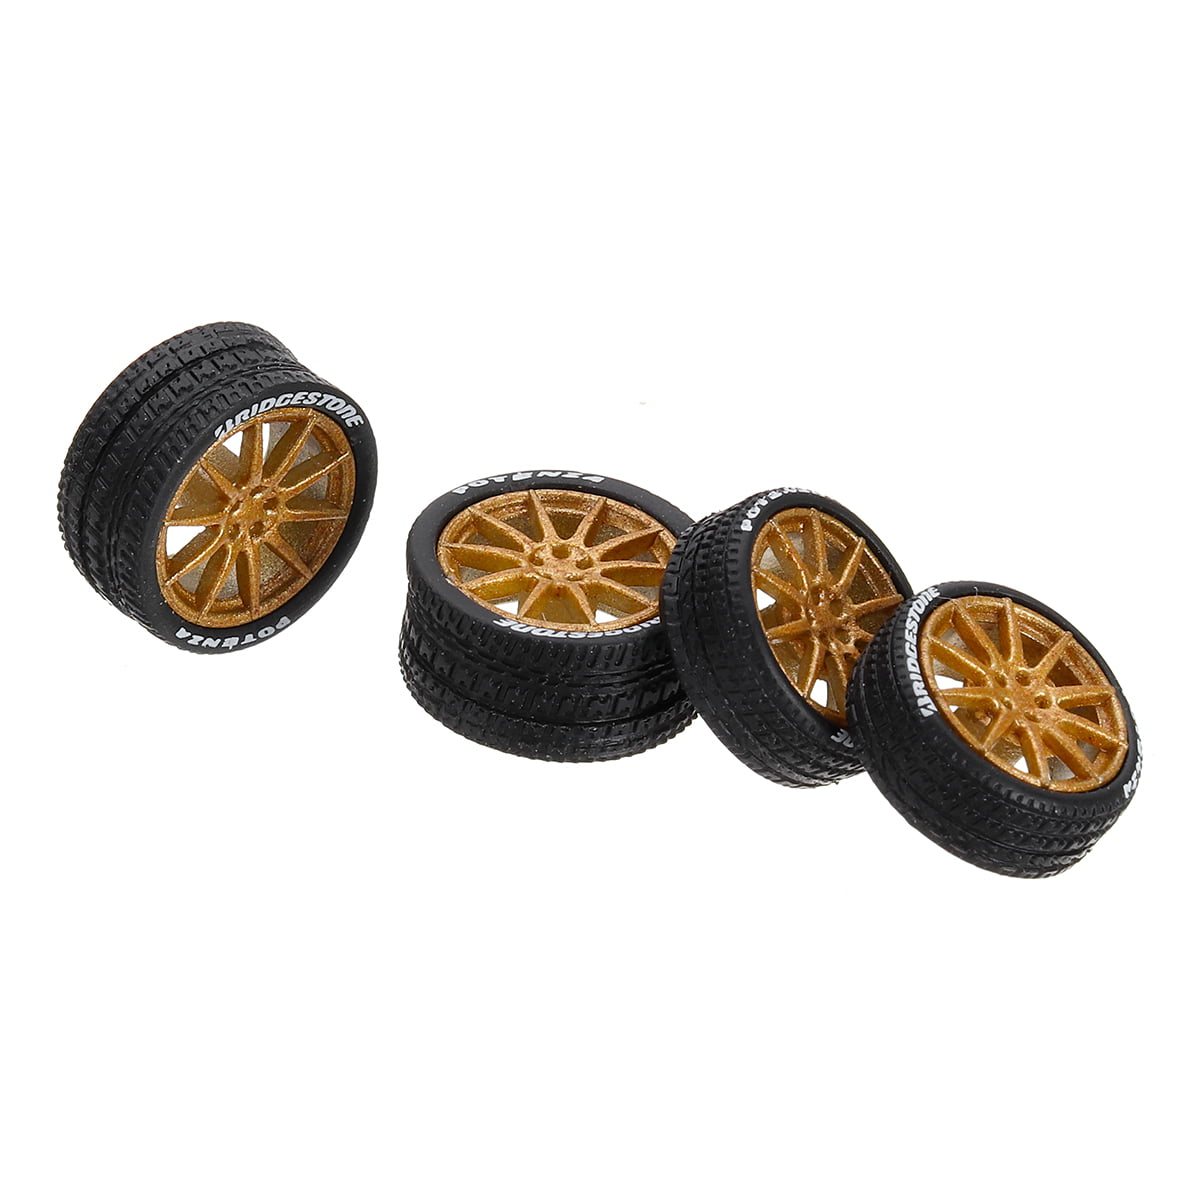 Details about   1 Set Custom Wheel Rubber Tire Axle Brake Disc for 1:64 Hot Wheel Tomy Car